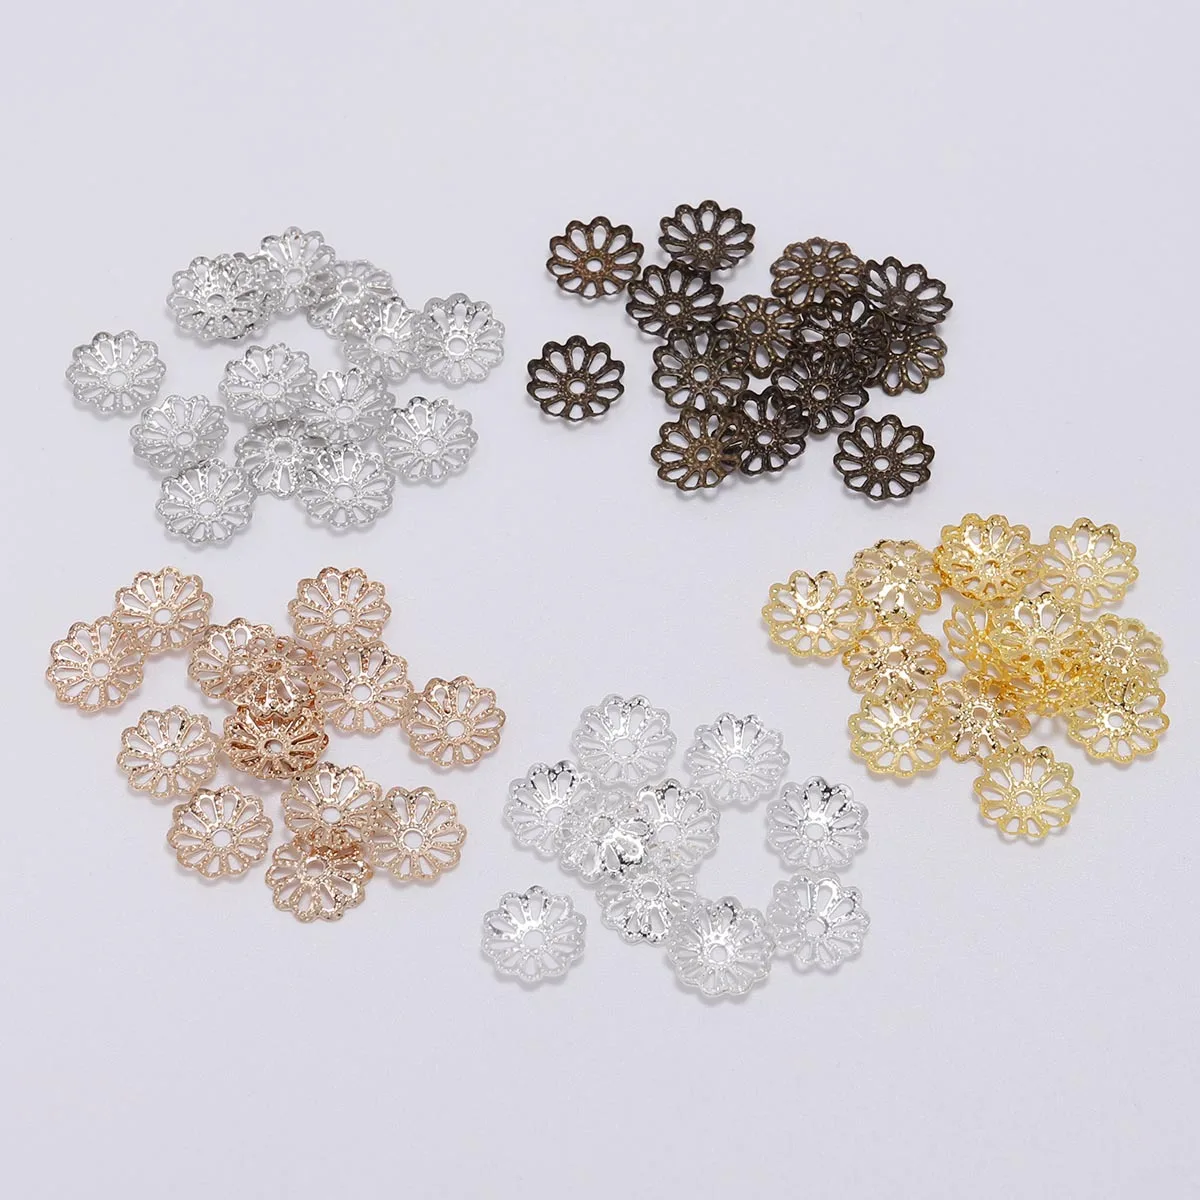 

200Pcs 7mm/9mm Silver Gold Plated Flower Petal End Spacer Beads Caps Charms Bead Cups For Jewelry Making DIY Wholesale